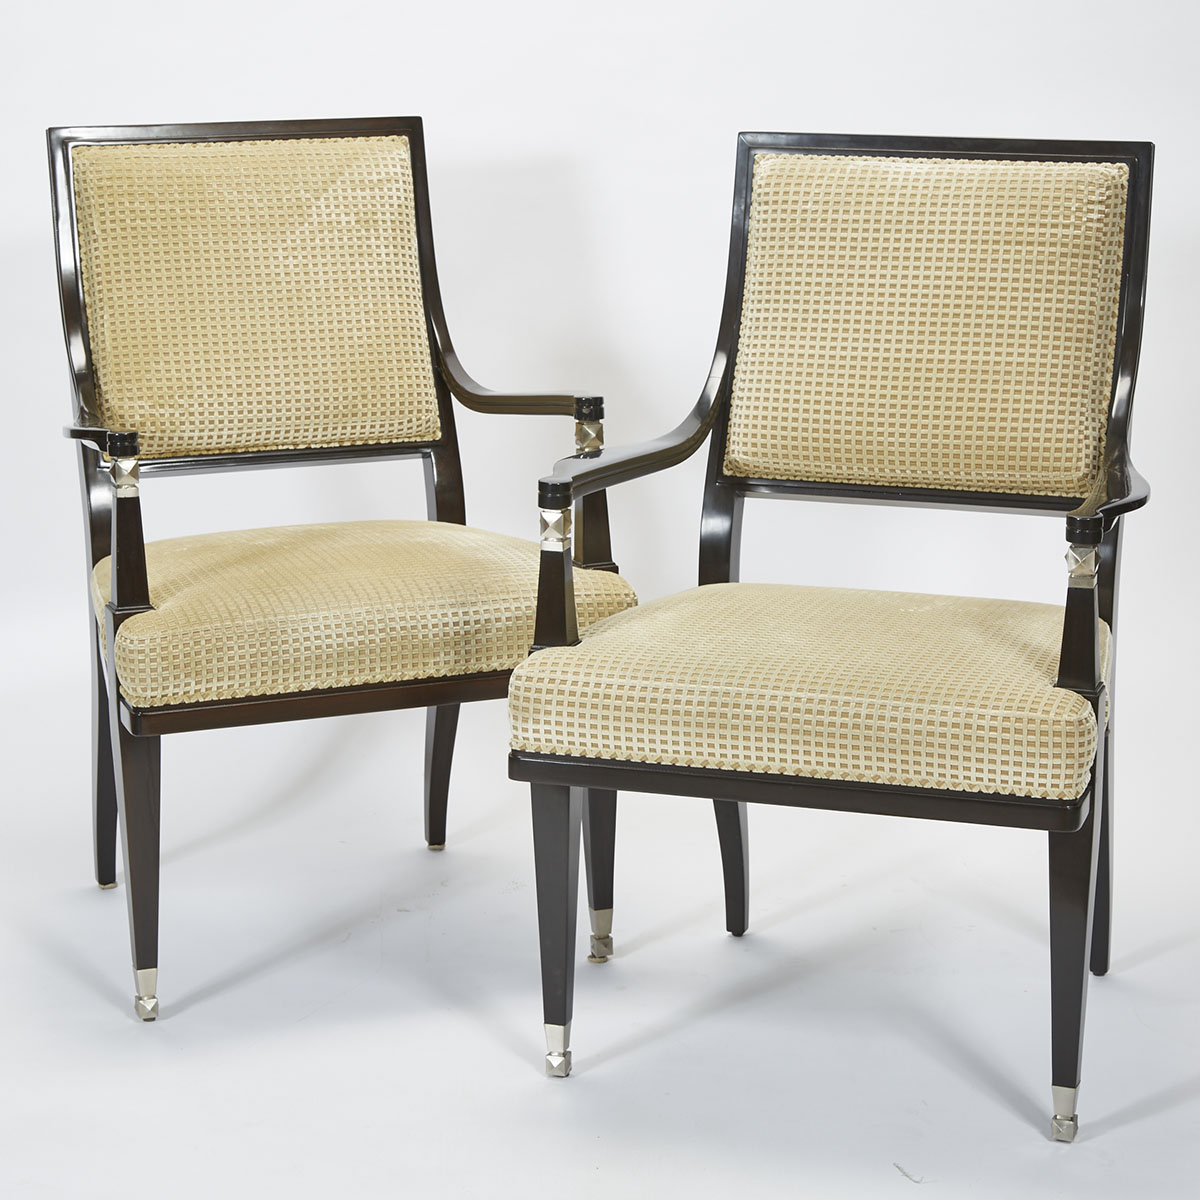 Pair of Lucien Rollin Collection ‘Elysee’ Open Armchairs, William Switzer, 21st century